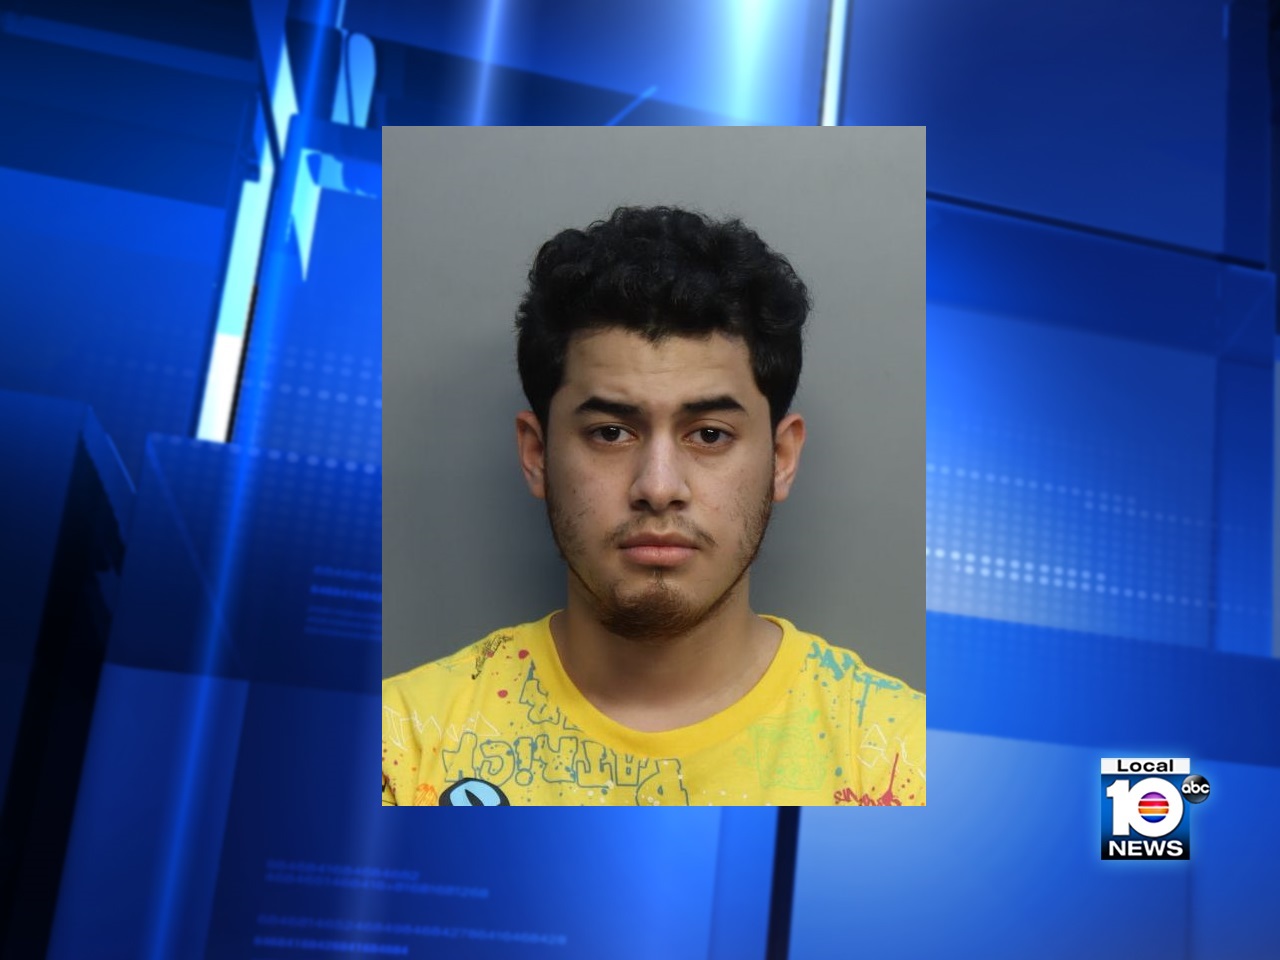 Arrested - 19-year-old arrested after allegedly uploading child porn to social media  accounts, police say